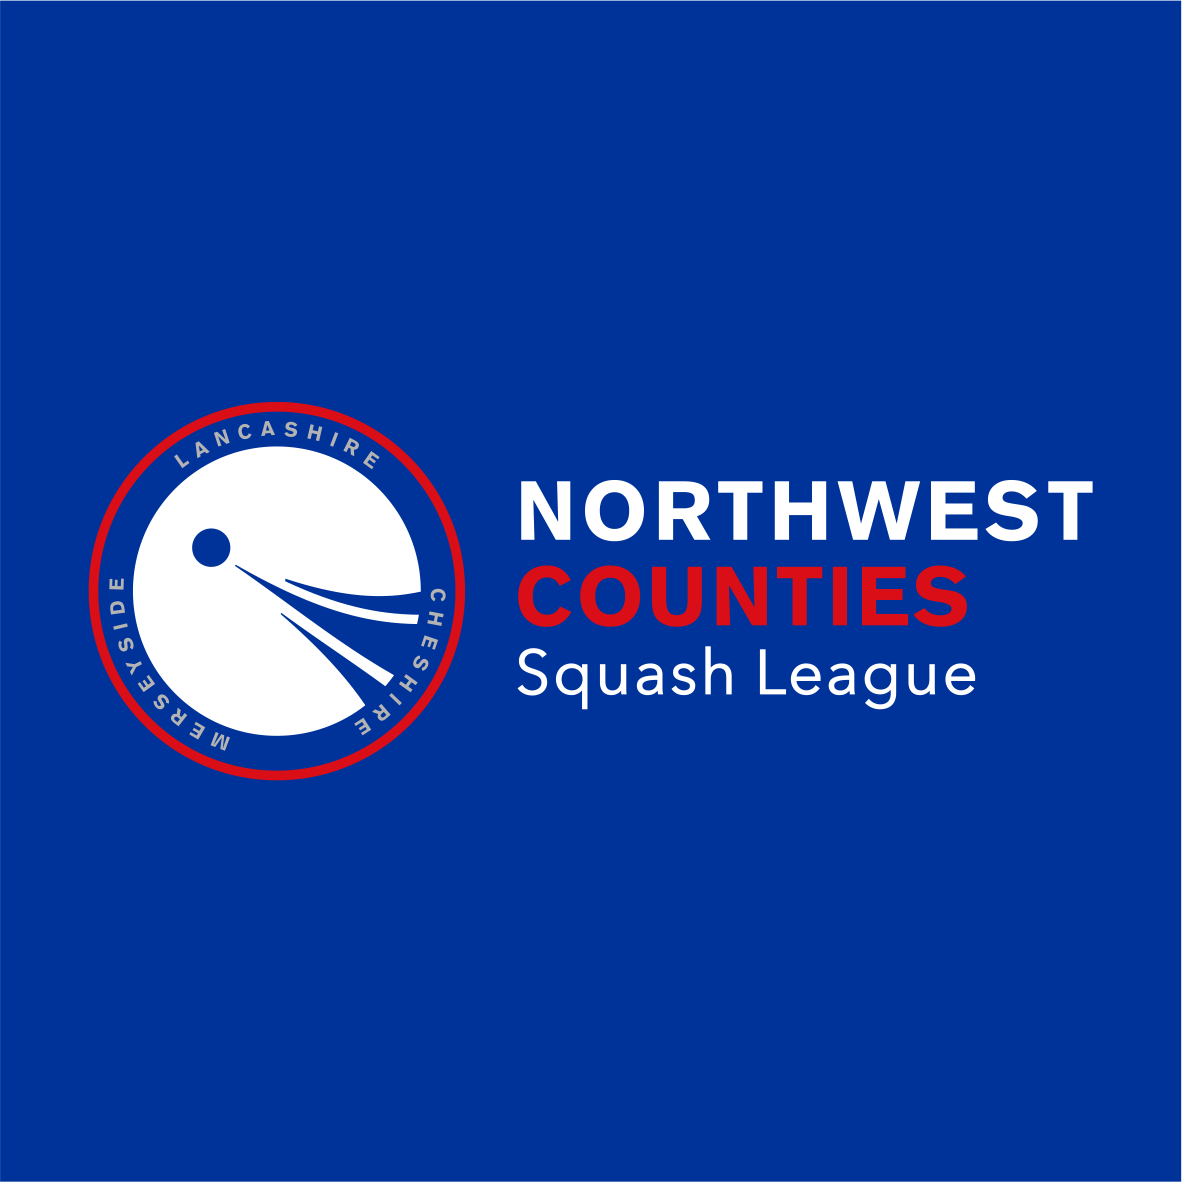 North West Counties Squash League (NWCSL)